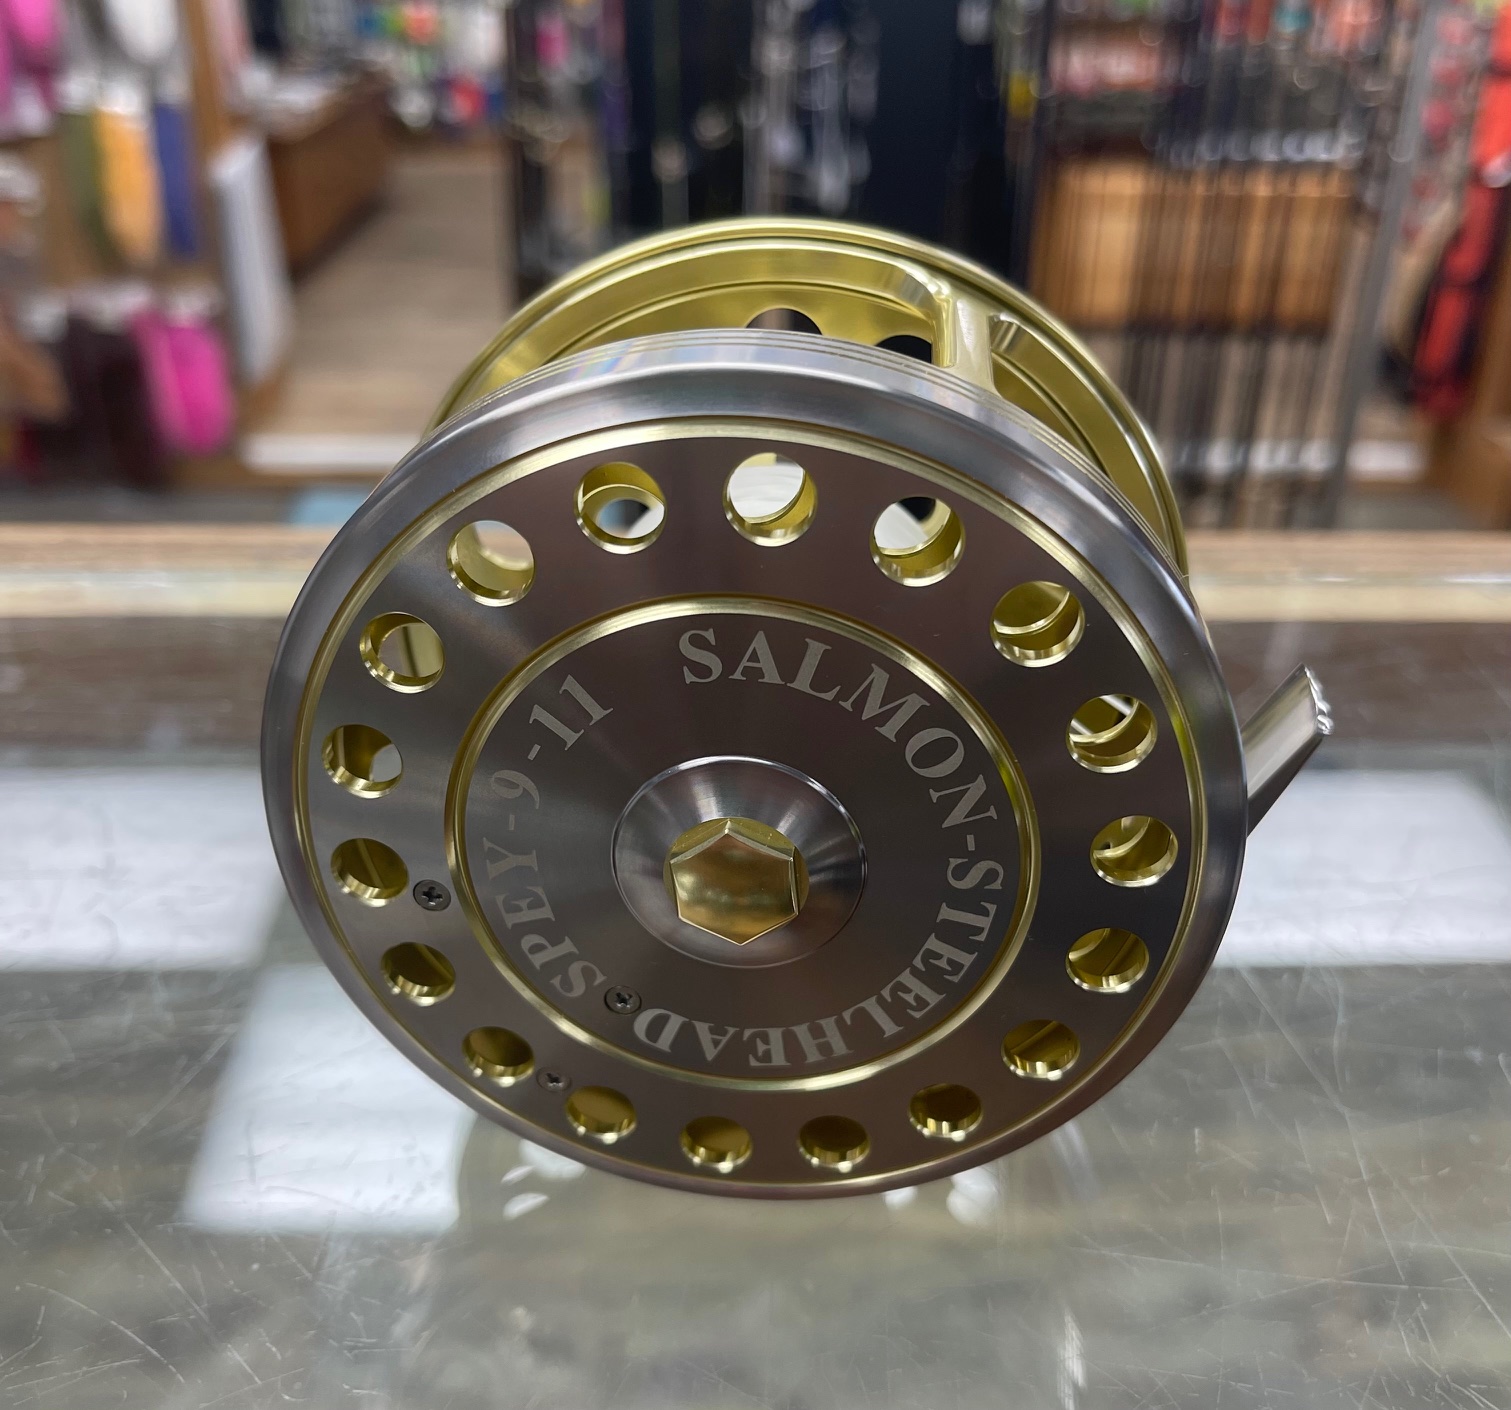 Dragonfly Salmon Spey 9/11 Fly Reel - Like New